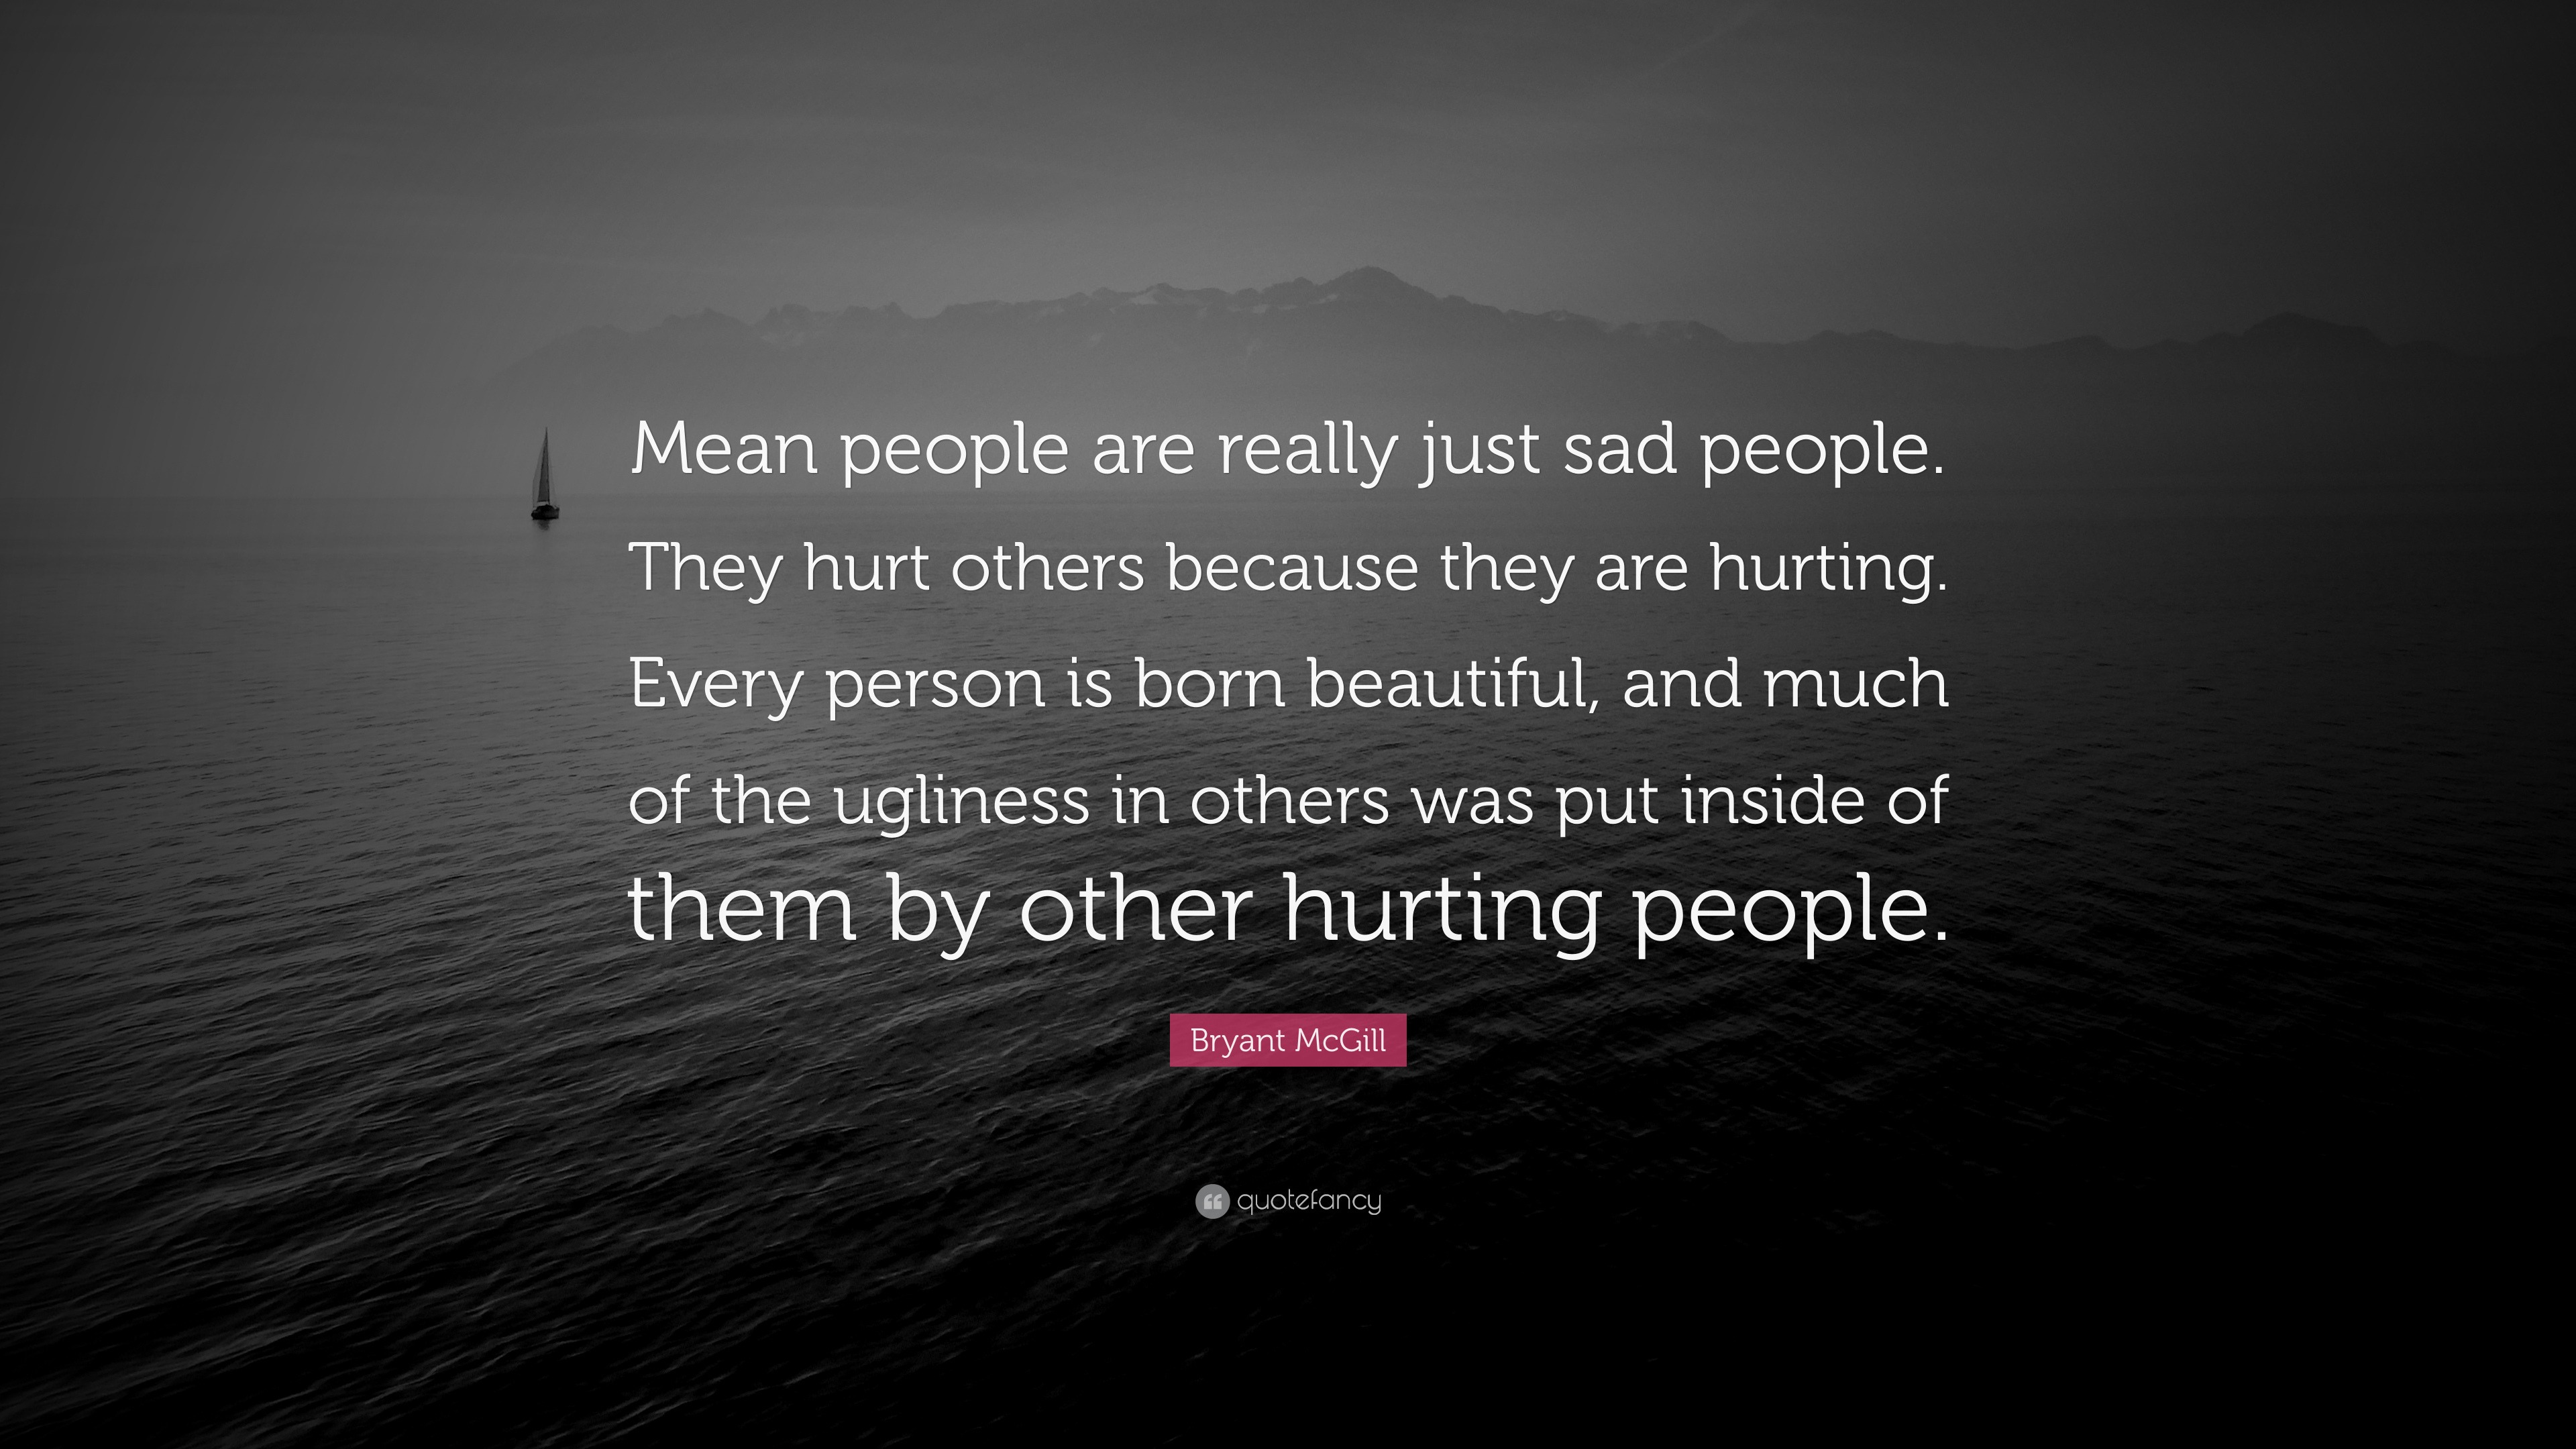 Bryant Mcgill Quote: “Mean People Are Really Just Sad People. They Hurt Others Because They Are Hurting. Every Person Is Born Beautiful, And M...”